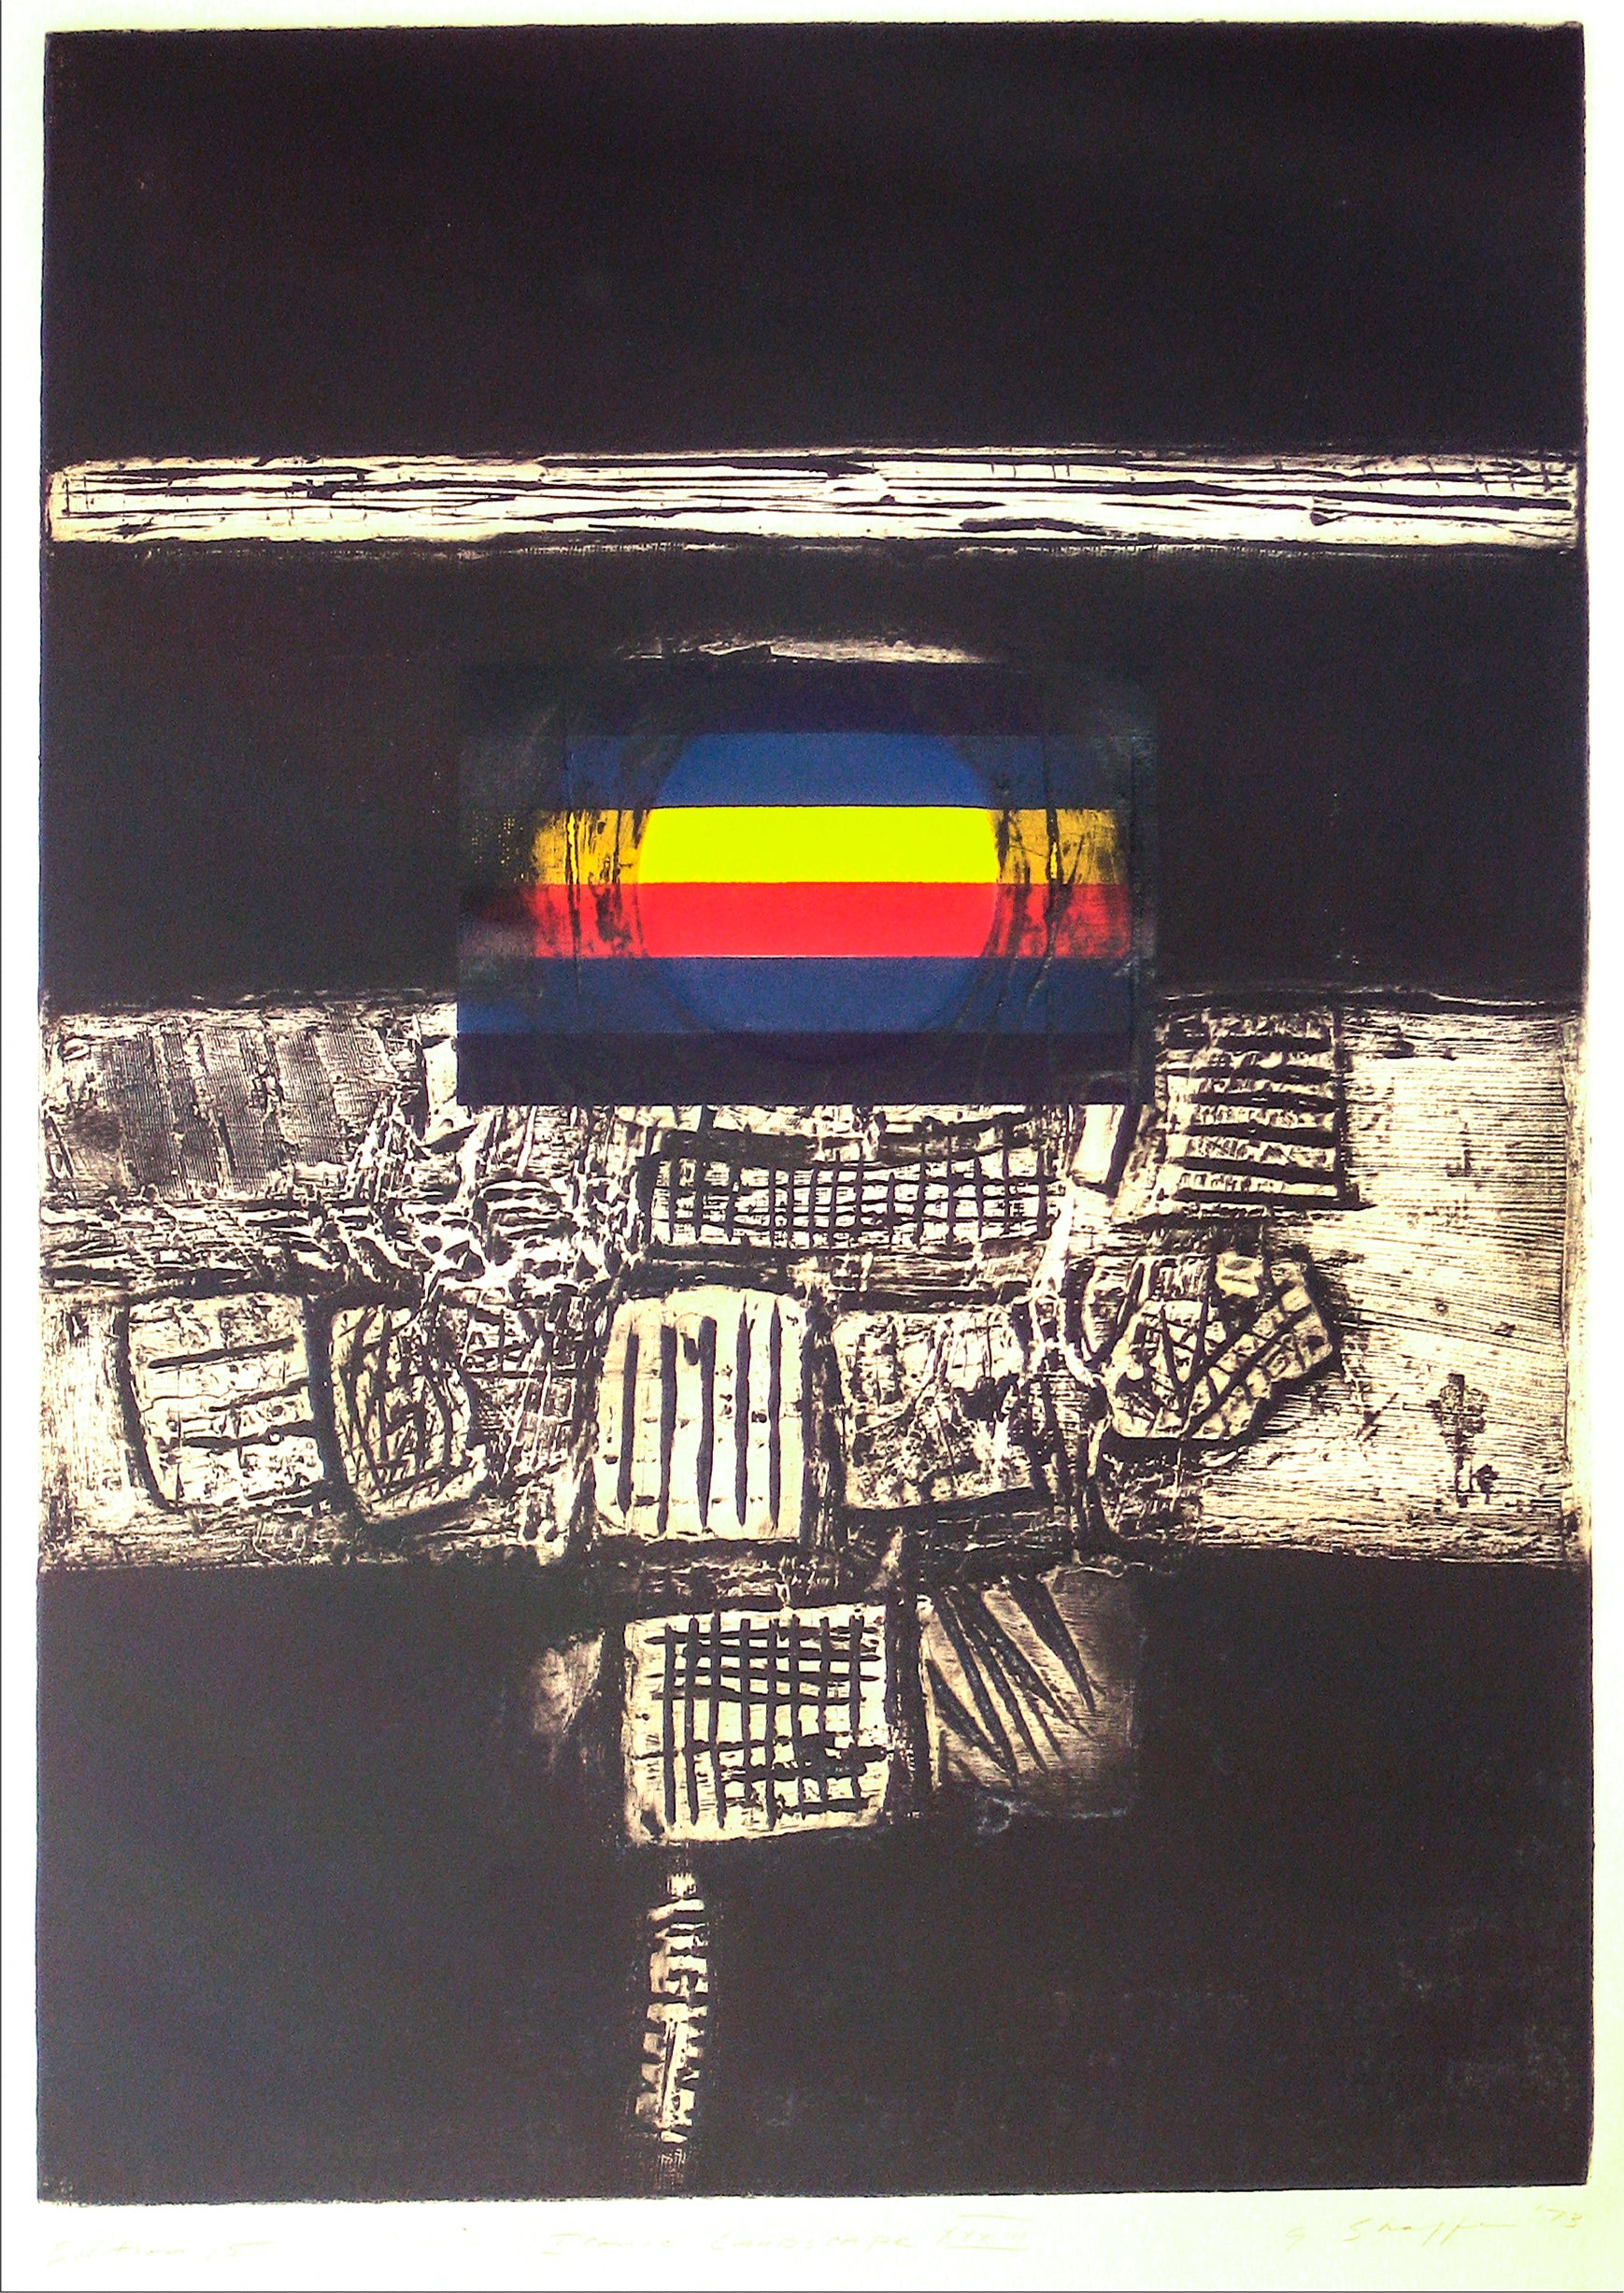 <i>Iconic Landscape XXXIII</i> <br>1970-80s Collograph <br><br>#11966